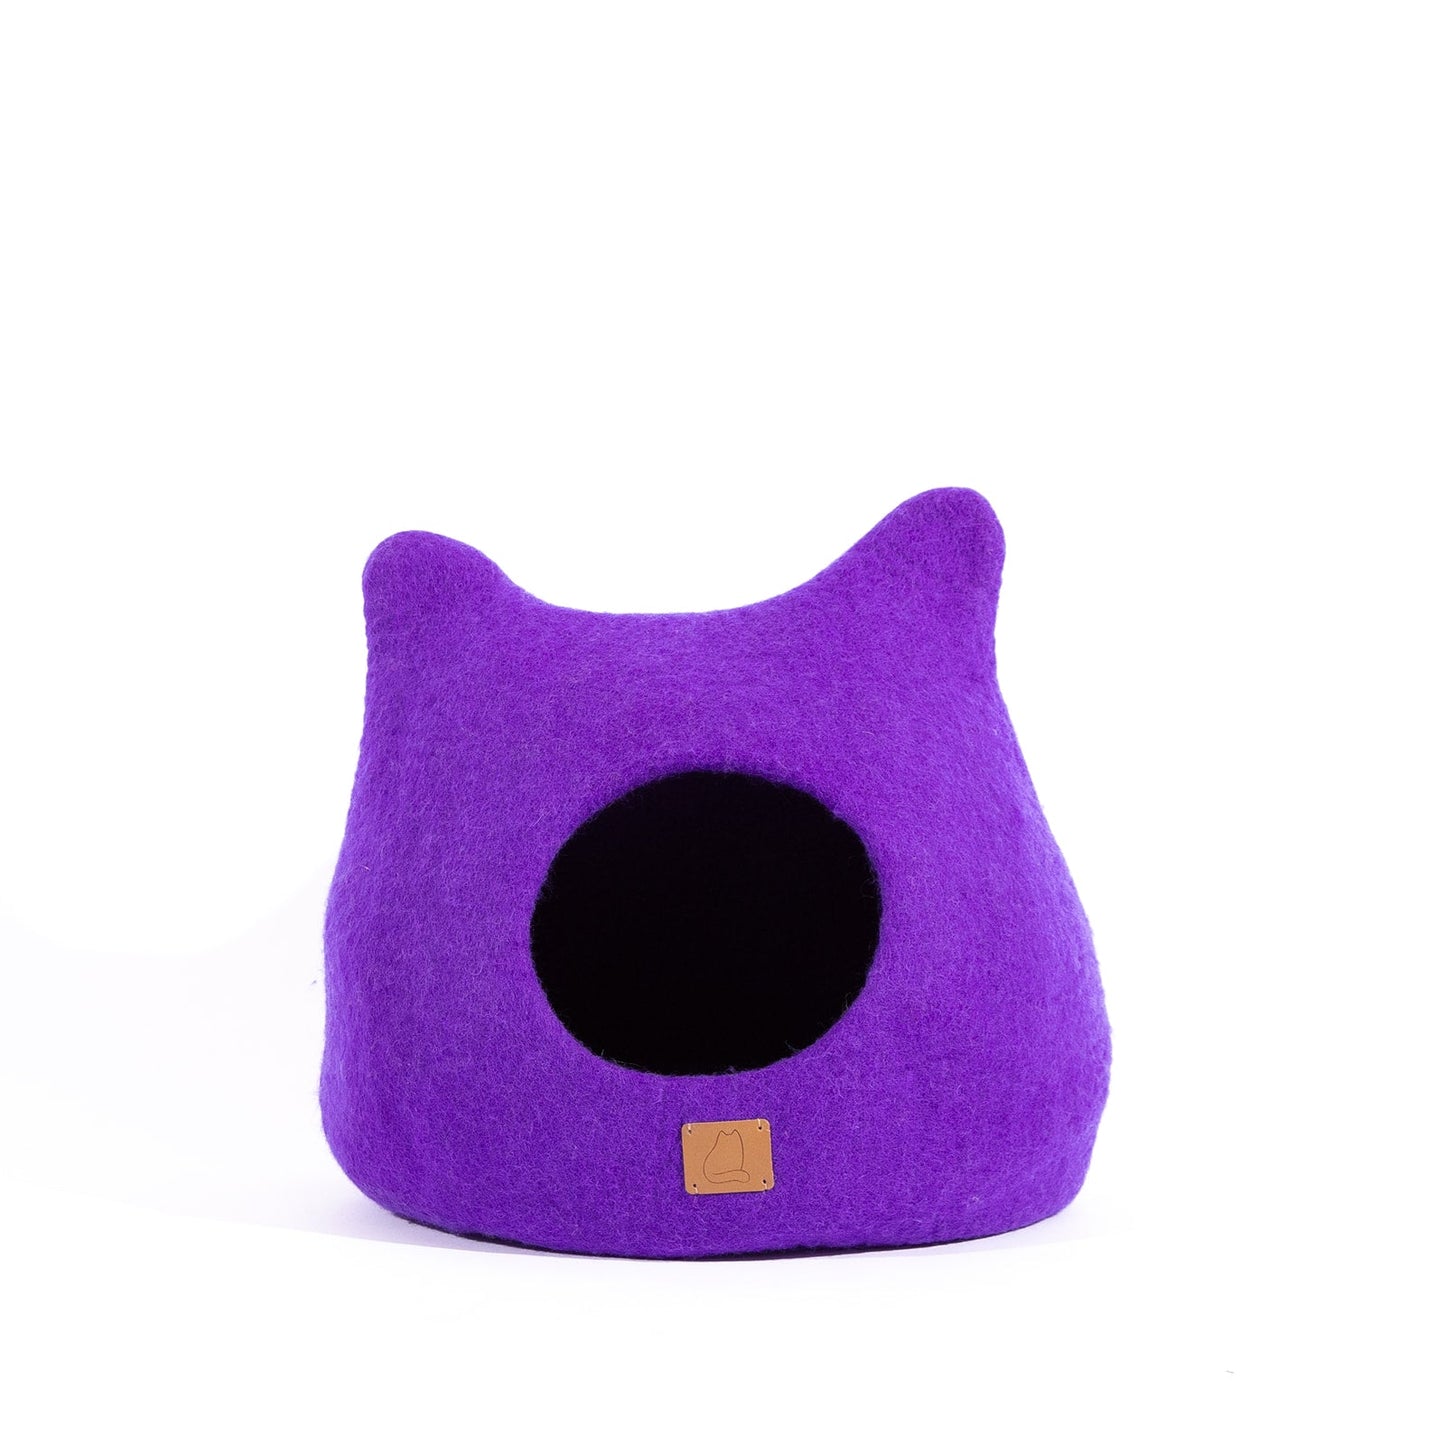 Whimsical Cat Ear Cave Bed - Plum Purple